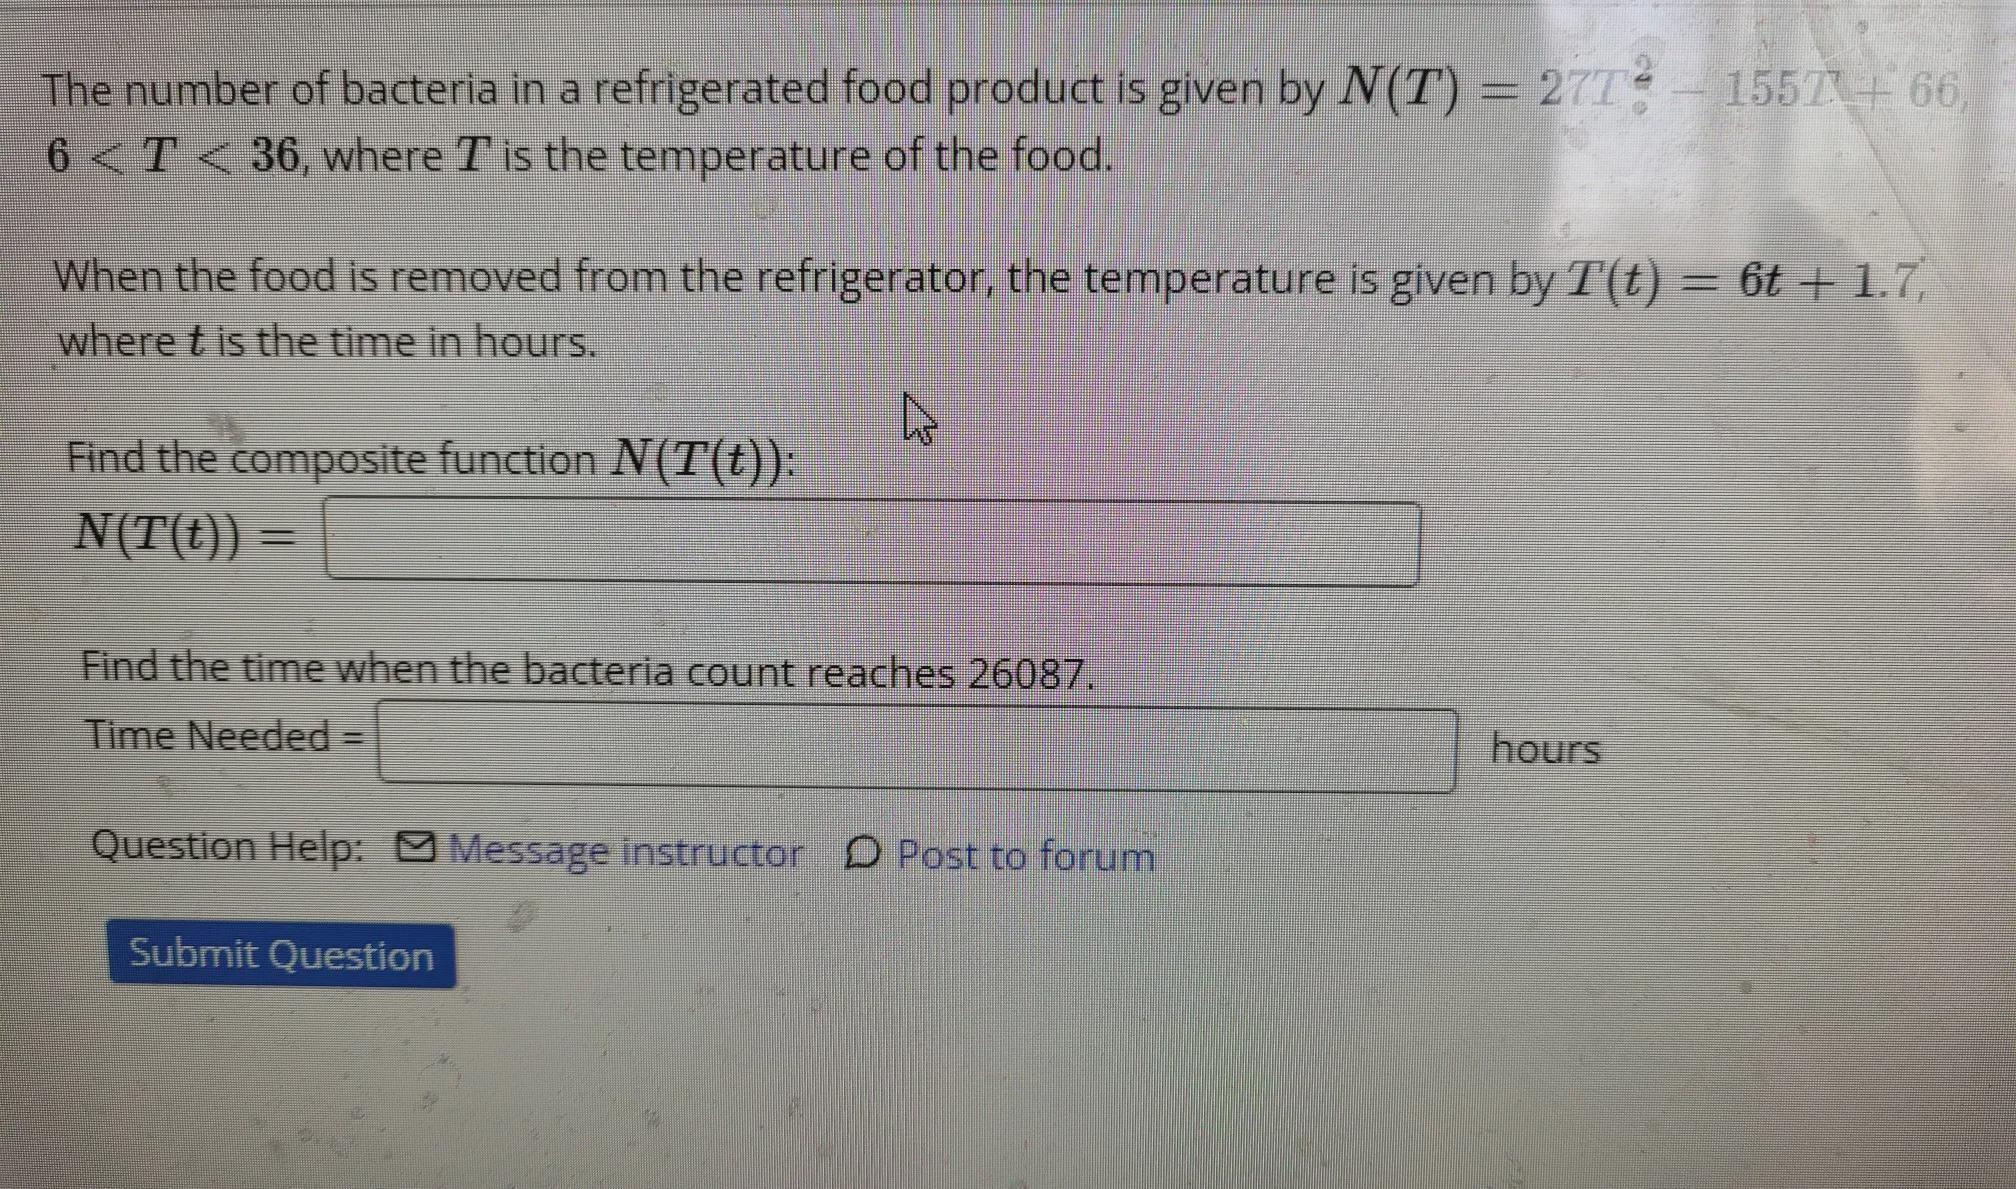 The Number Of Bacteria In A Refrigerated Food Product Is Given By N(T) = 27T^2 - 155T + 66, 6 &lt; T